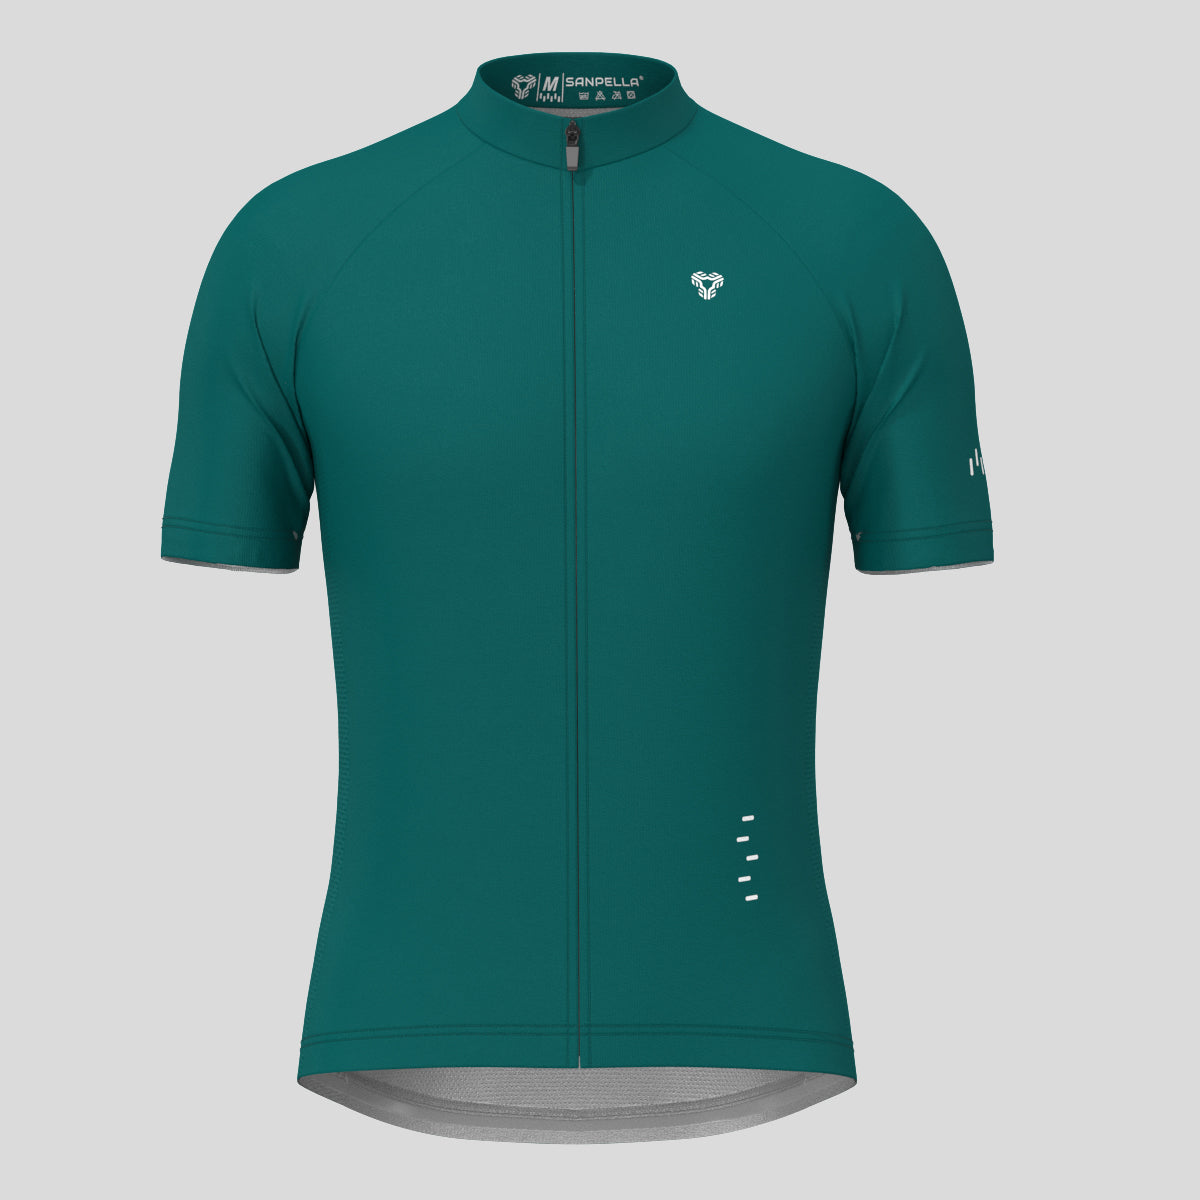 Men's Minimal Solid Cycling Jersey -Midnight